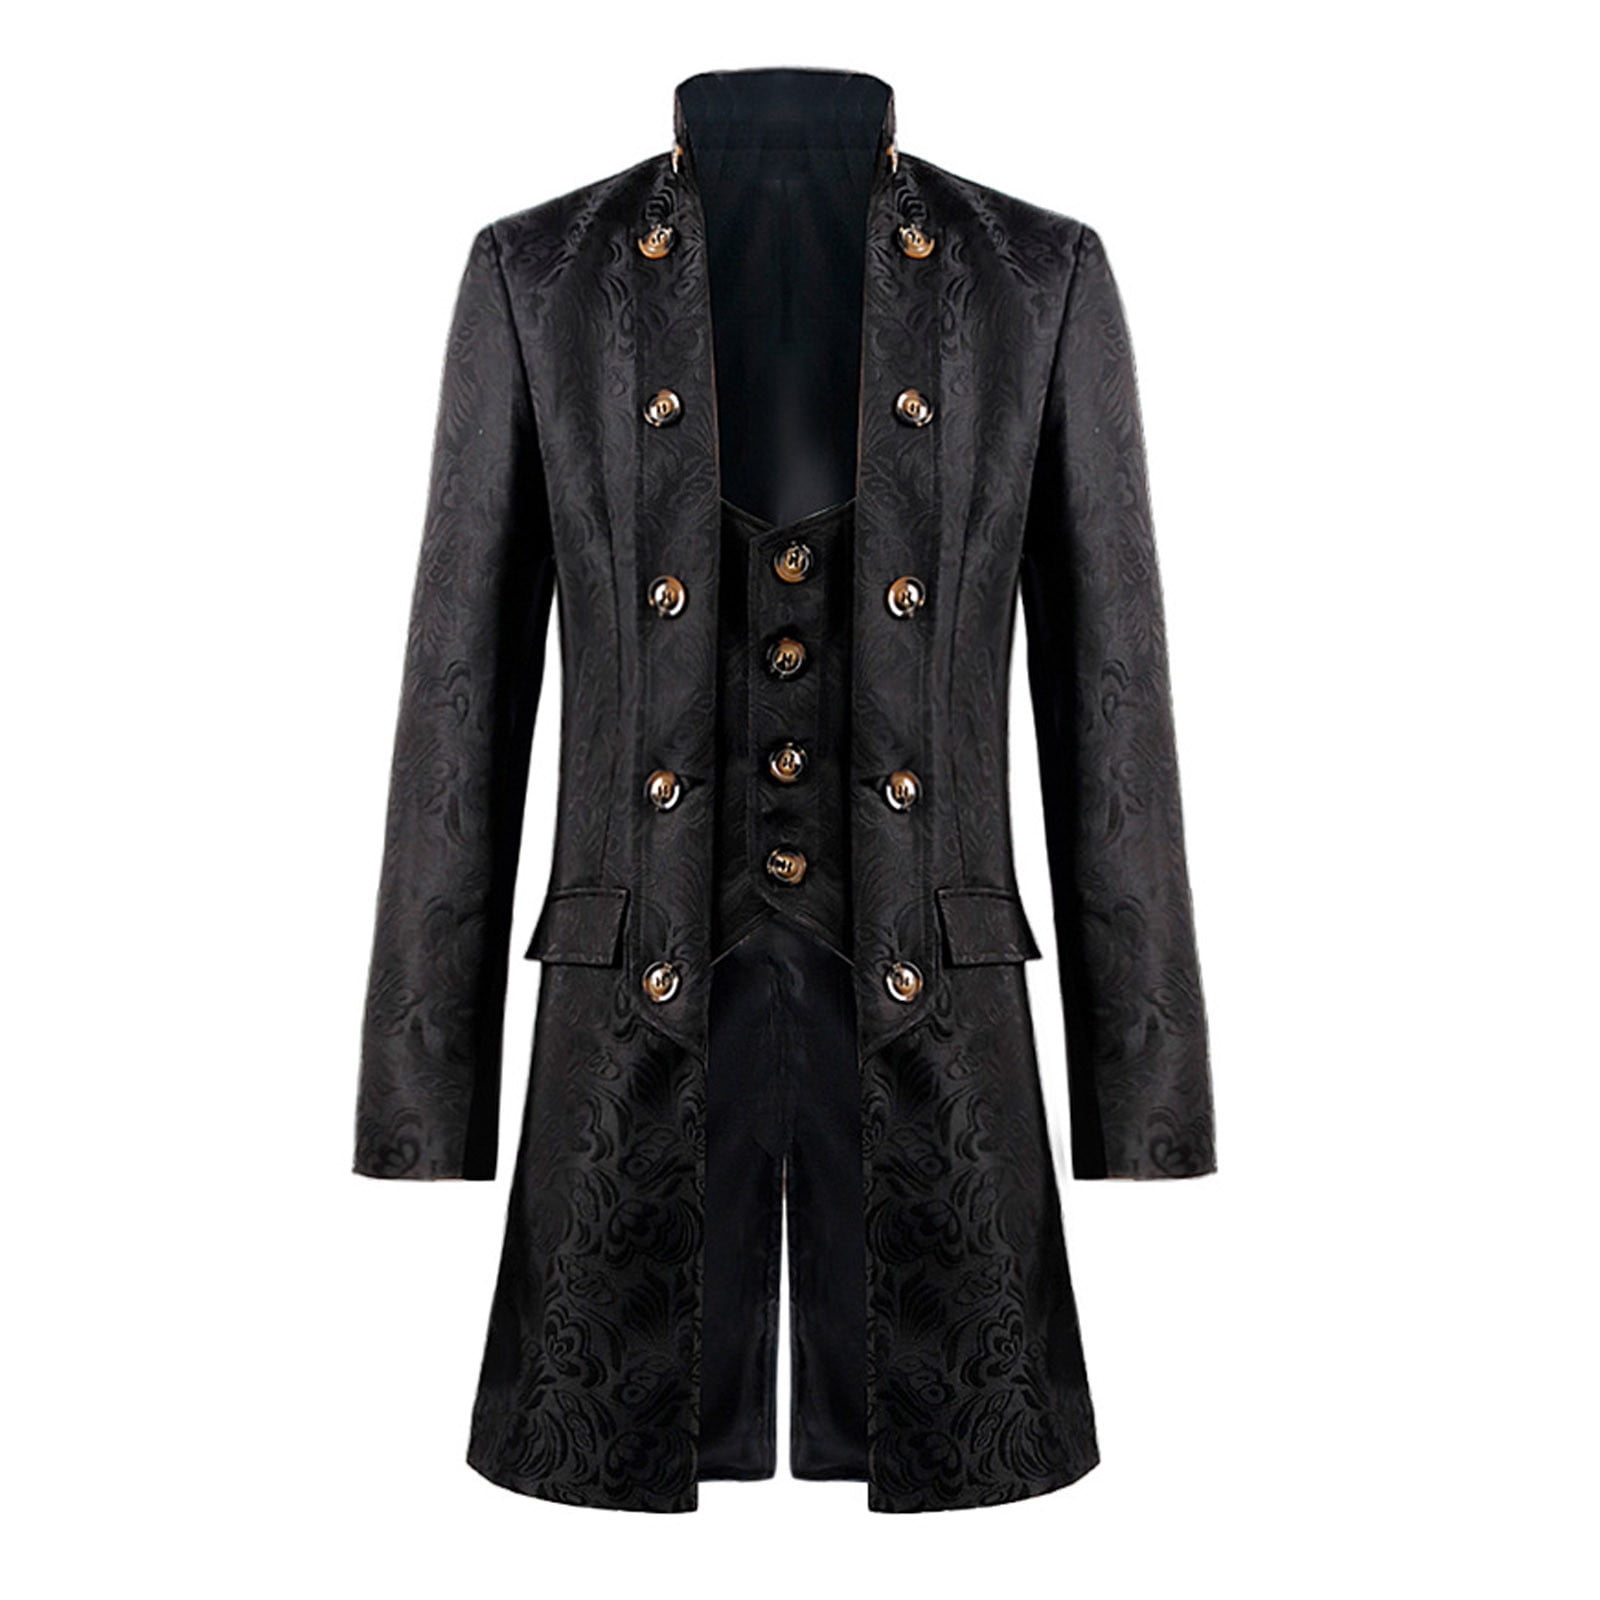 Black Victorian wedding suit, tailored frock coat in steampunk style